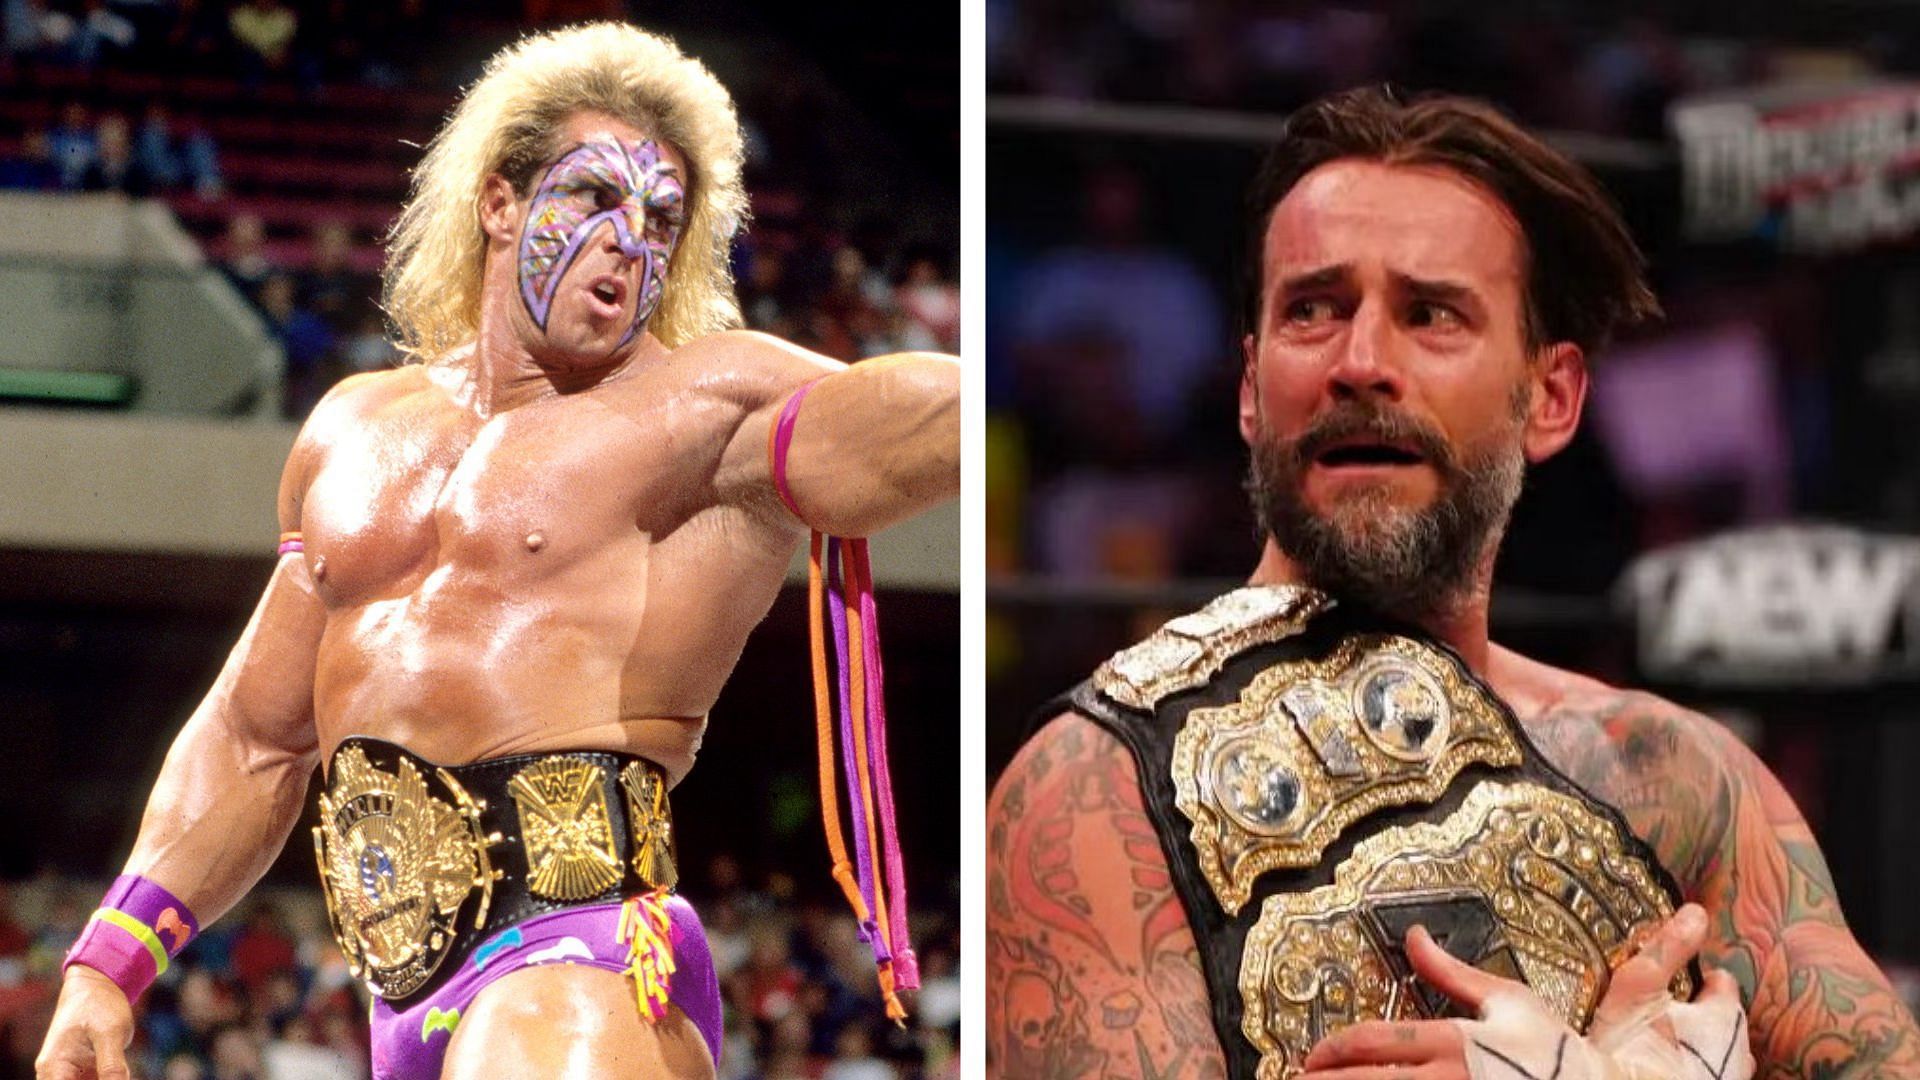 WWE has had several controversial wrestlers &amp; personalities over the years